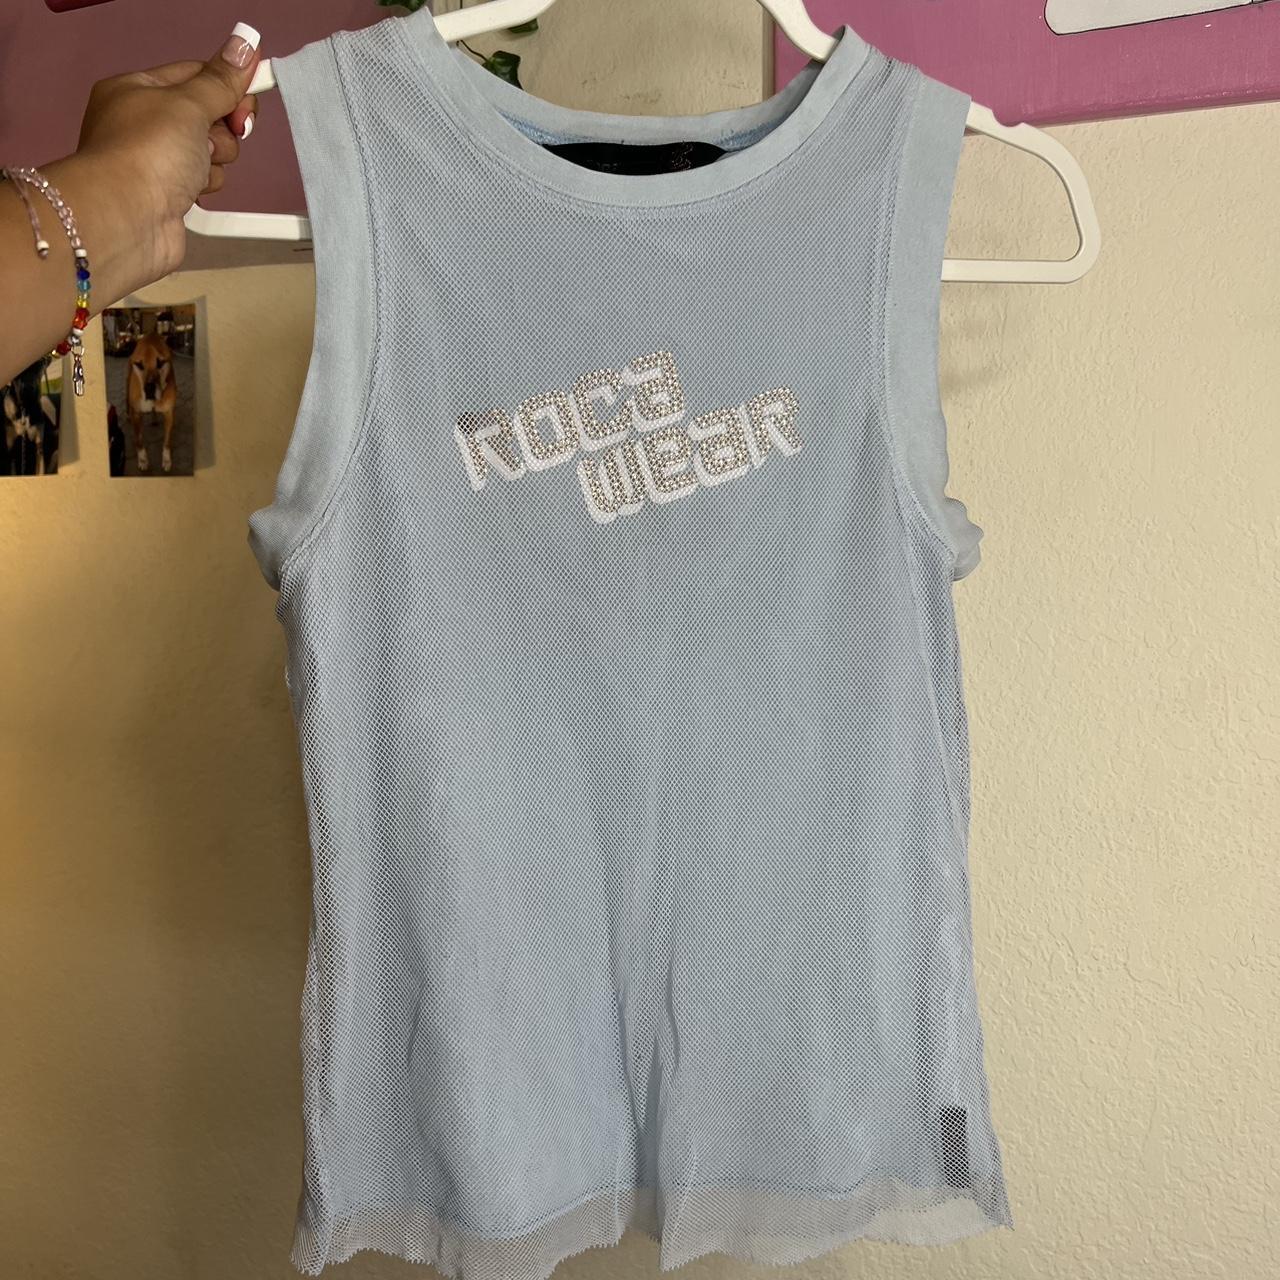 Rocawear Women's Blue and White Vests-tanks-camis | Depop